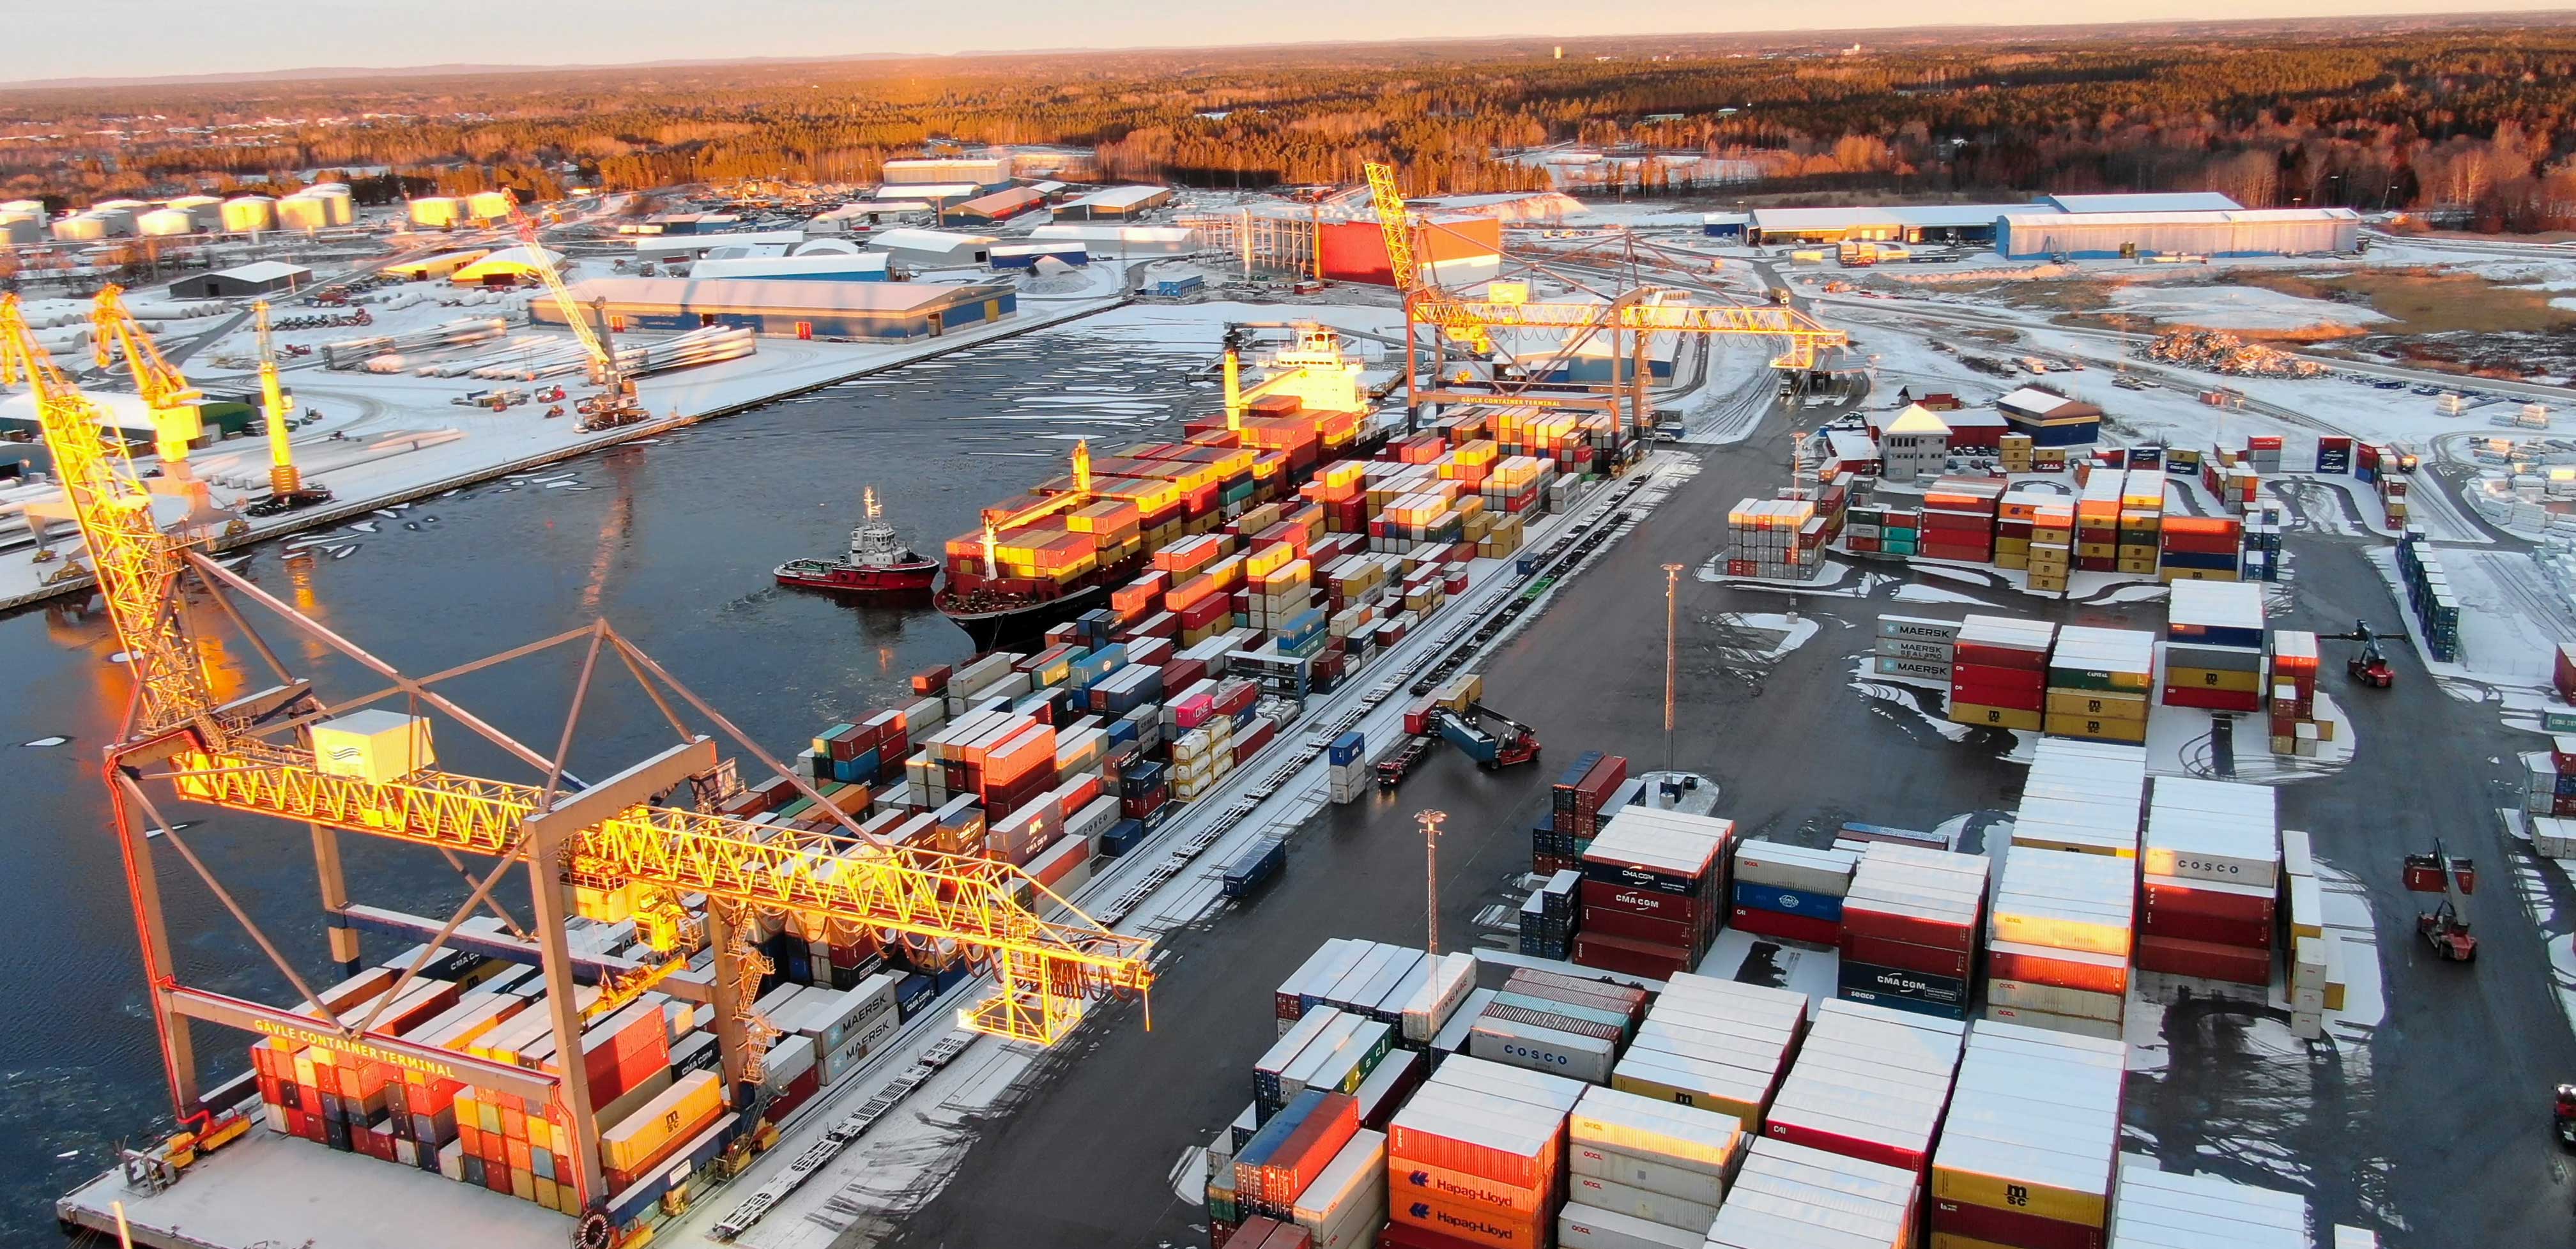 MERT DOKUM Project The Port of Gävle Container Terminal